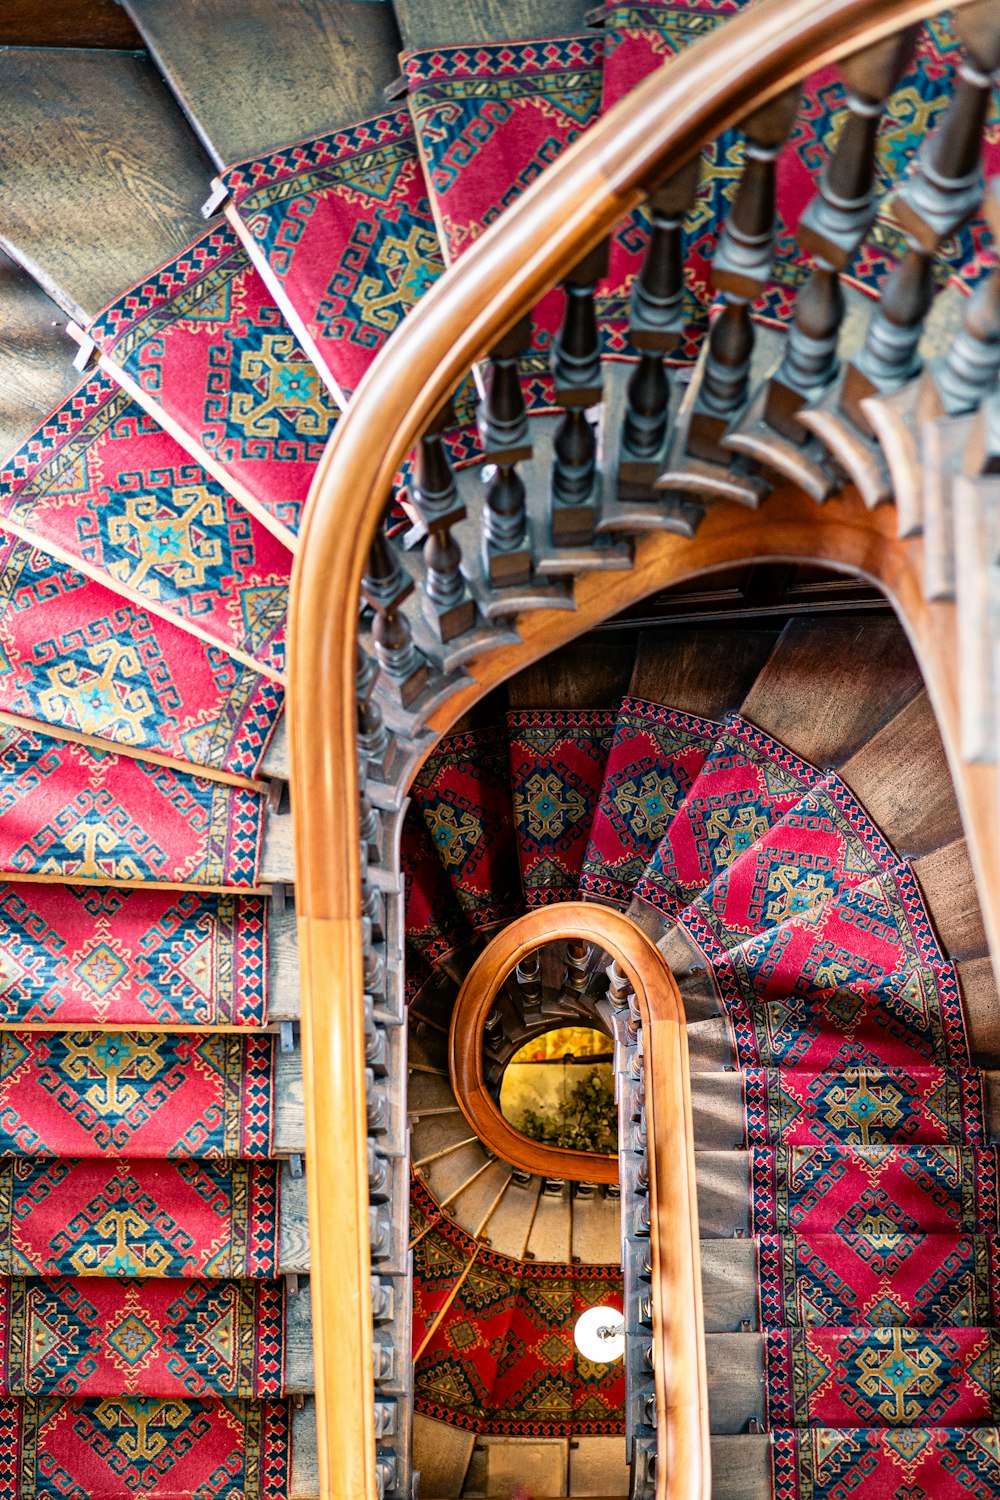 a view of a spiral staircase from the top